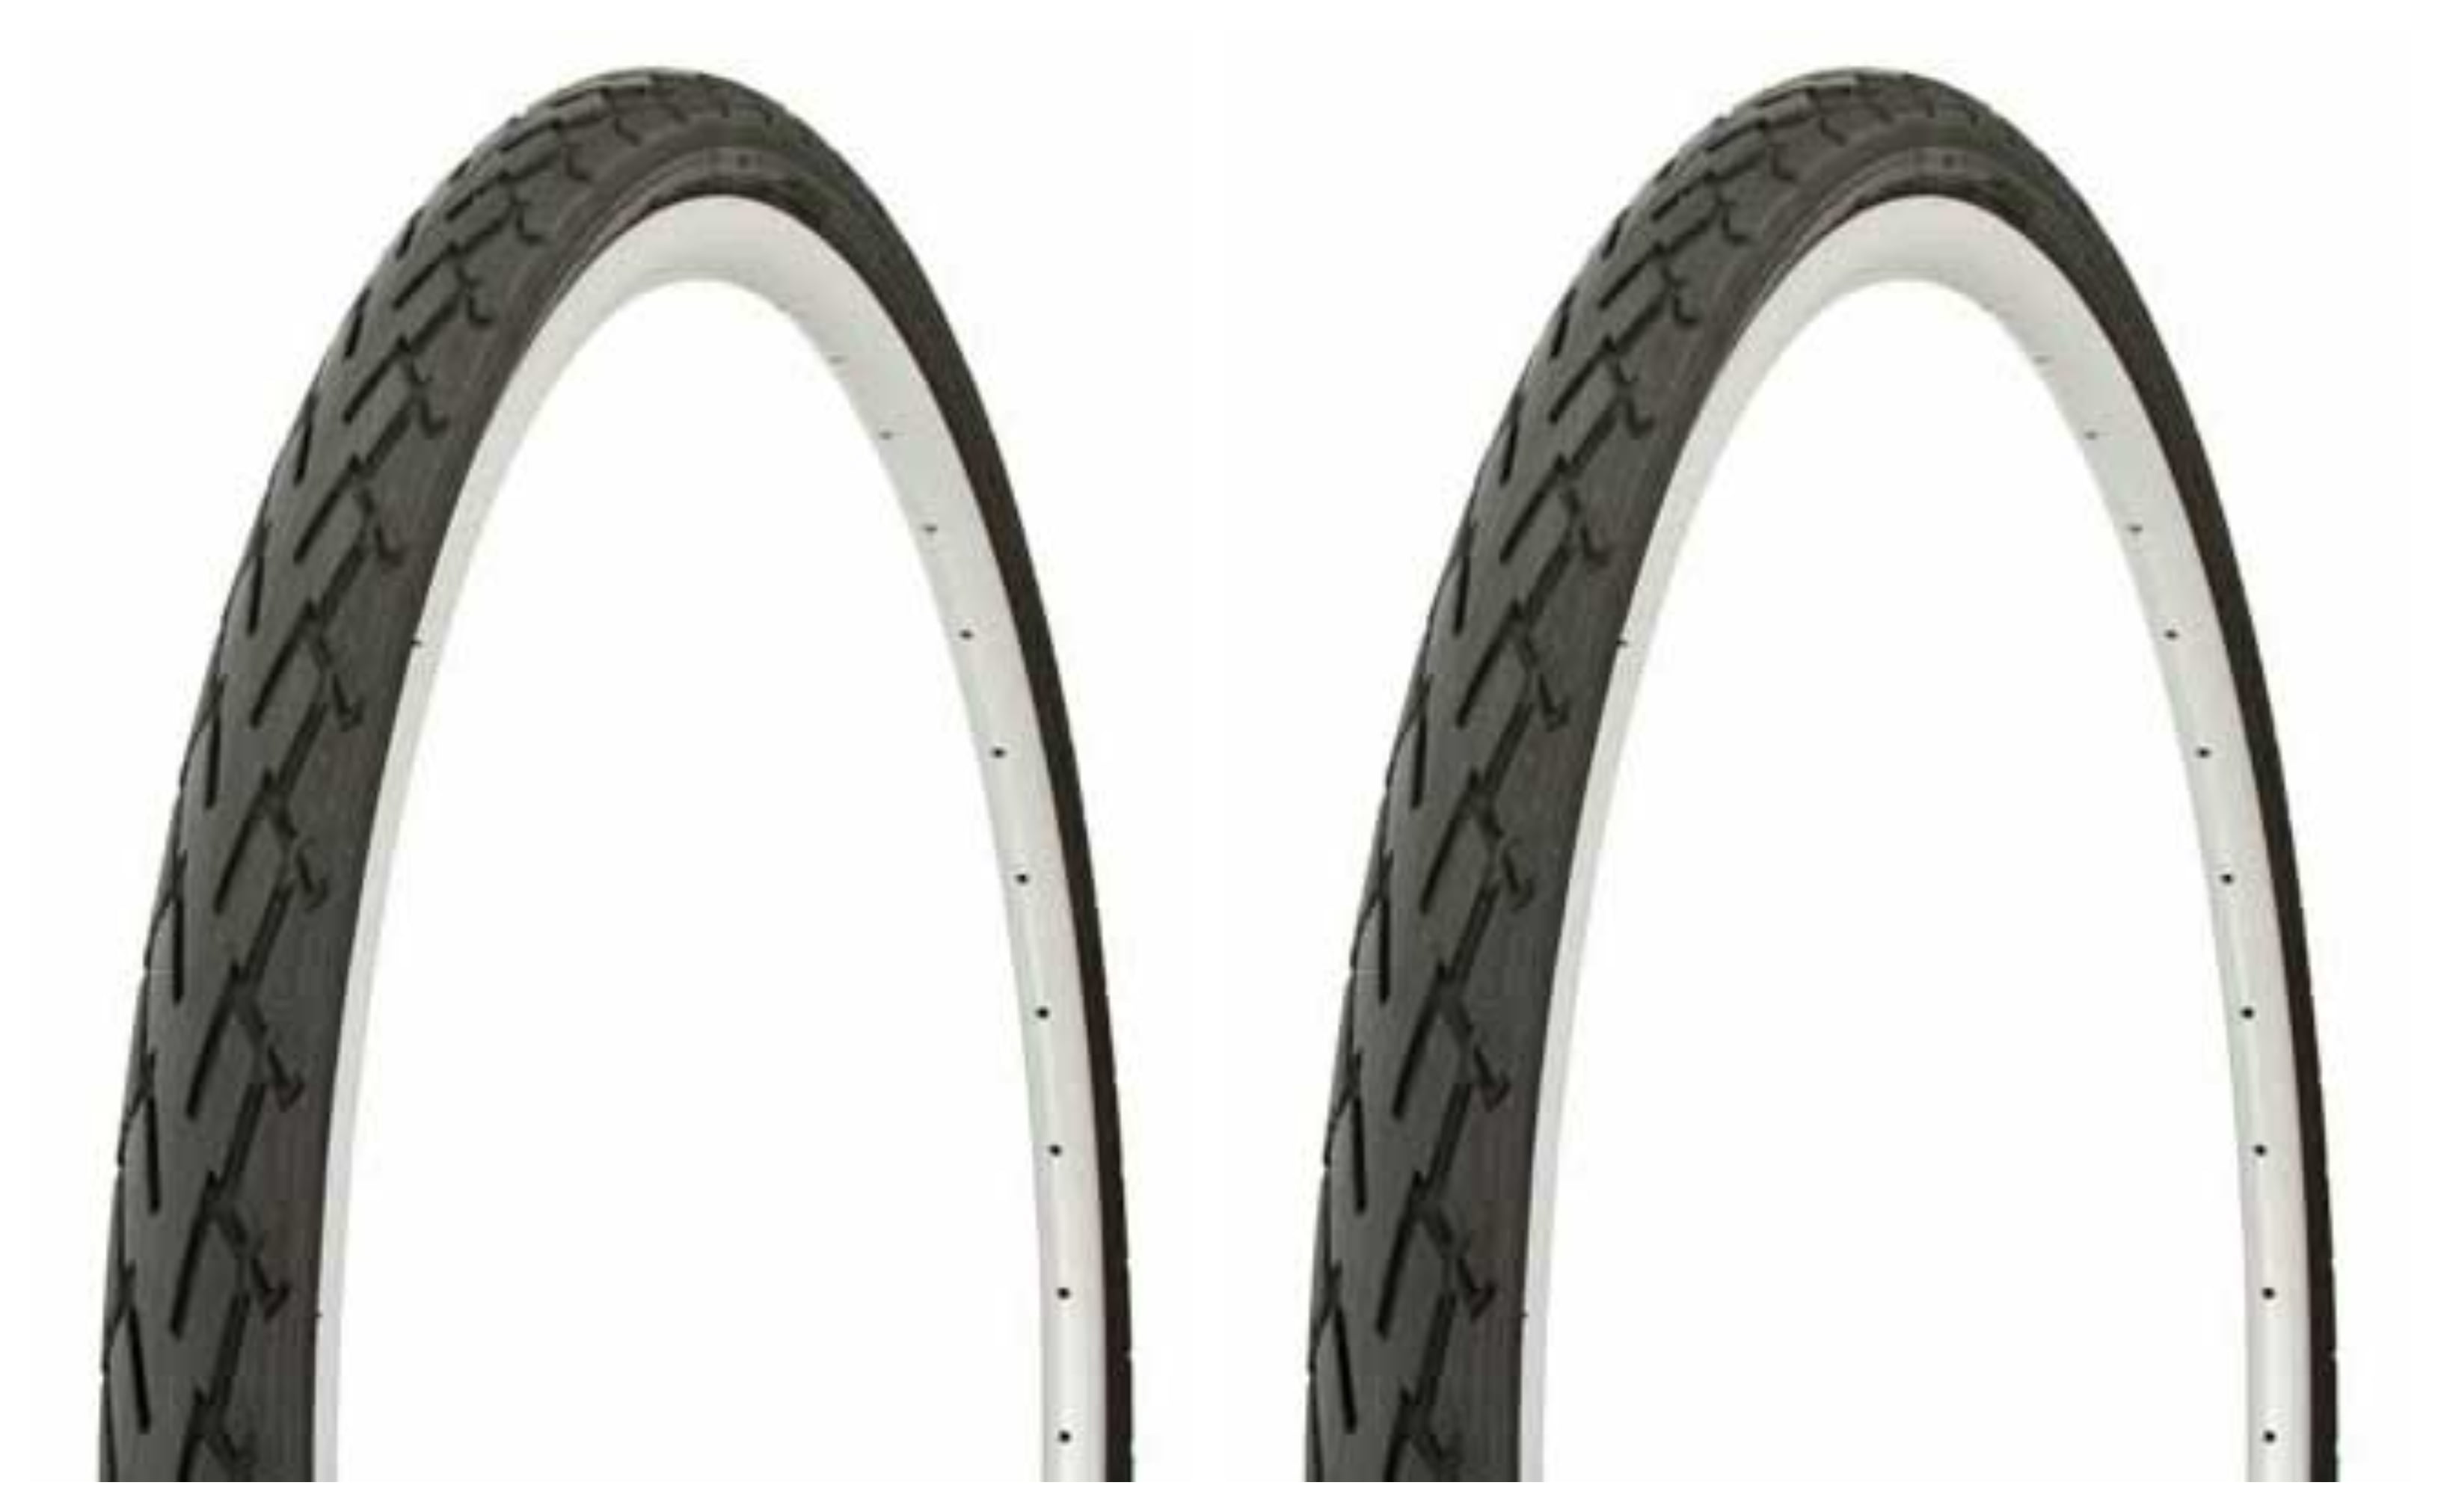 2 PACK Schwinn Bicycle Tire 700 x 35c PERFECT FOR FIXIE ROAD TOURING HYBRID TIRE 